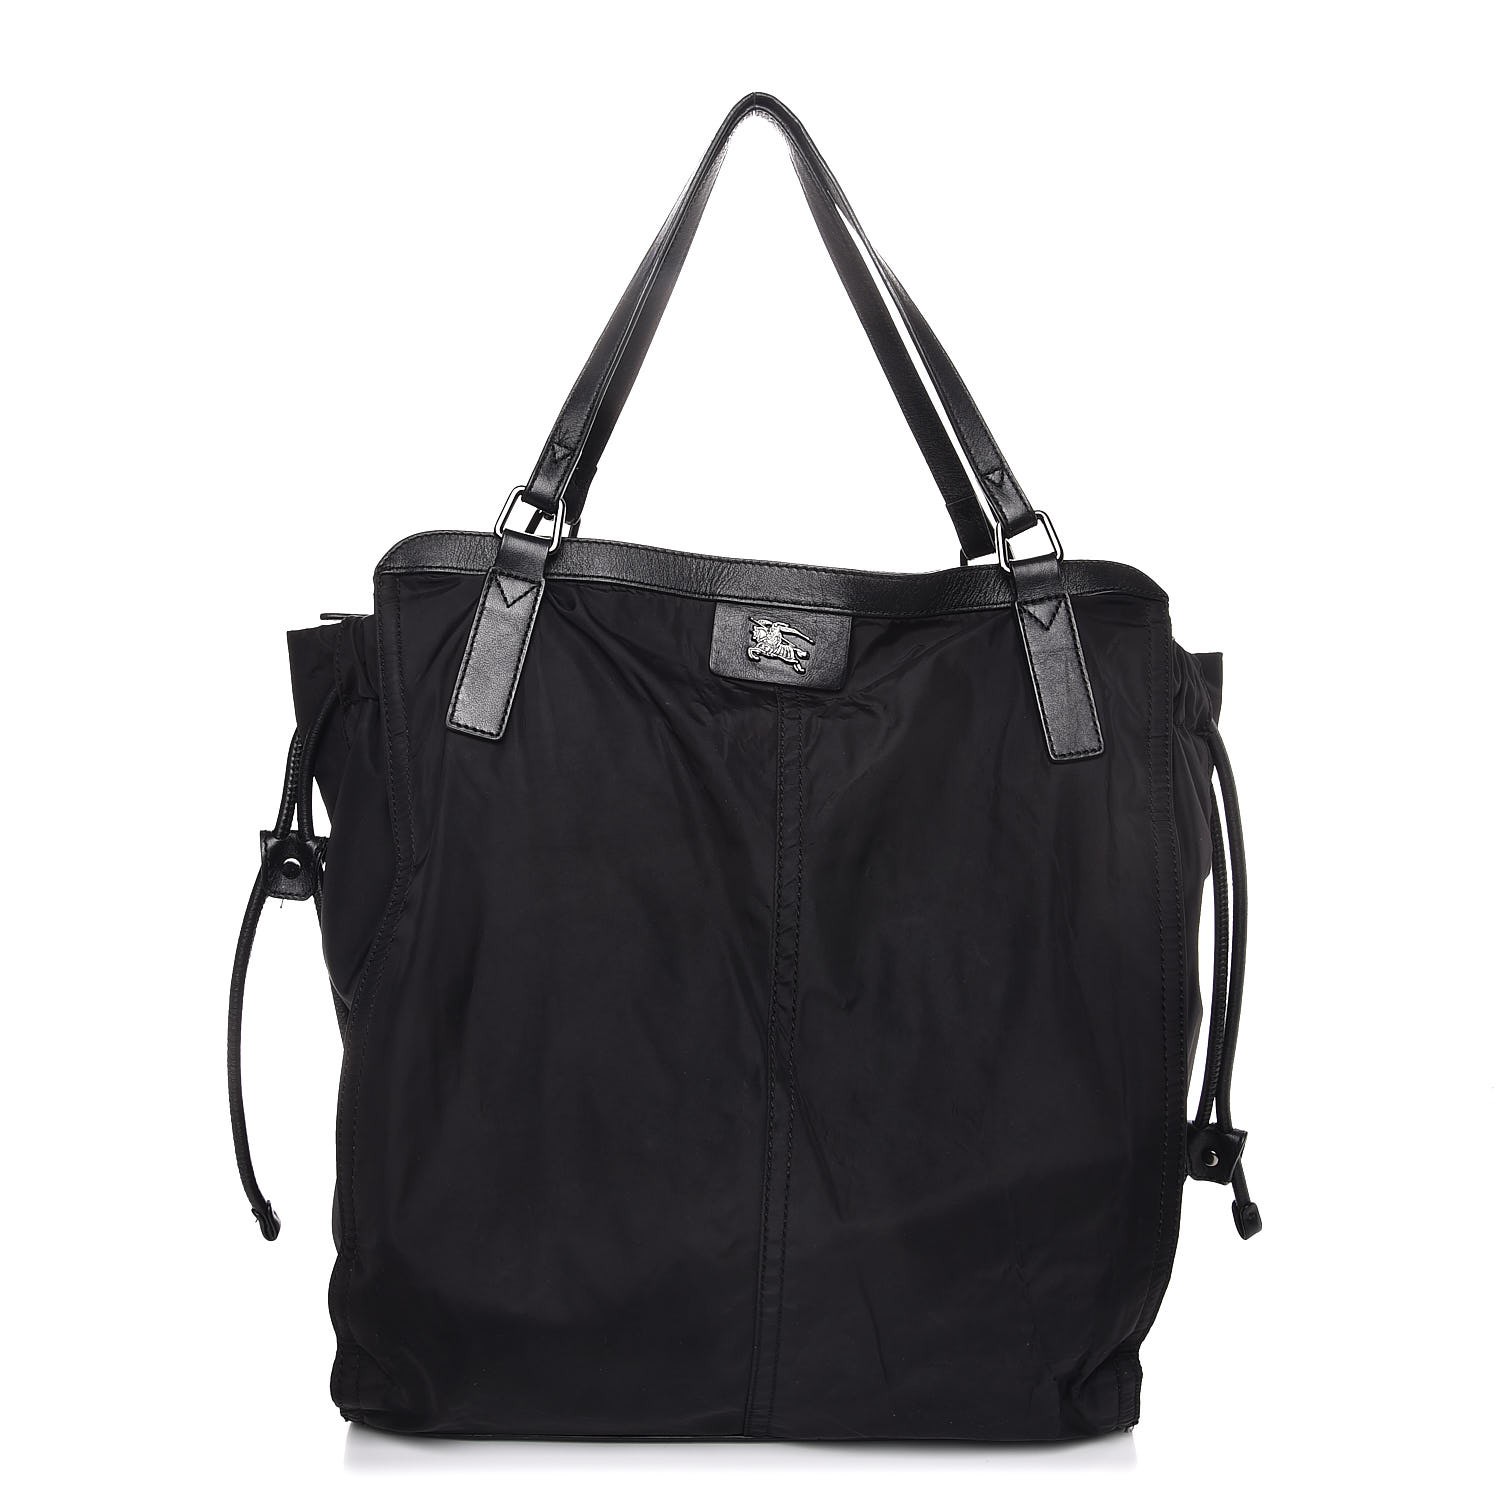 BURBERRY Nylon Buckleigh Packable Tote Black 298576